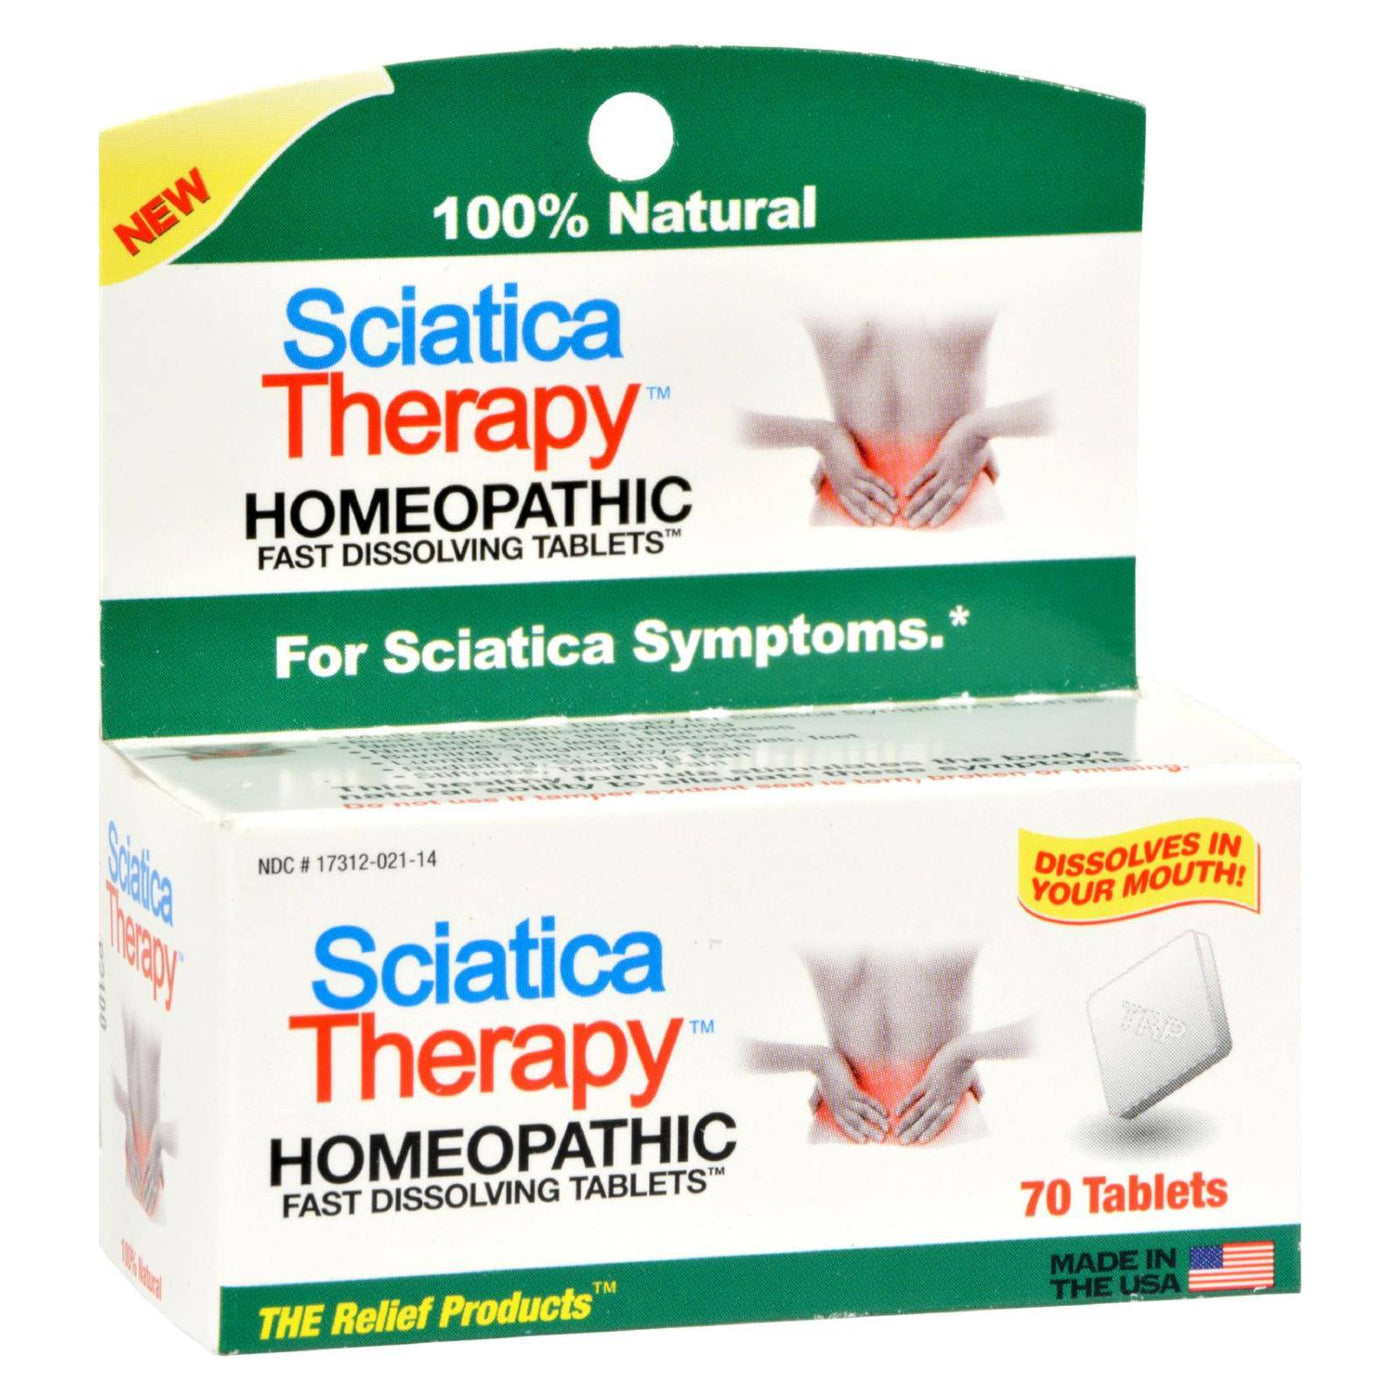 Trp Sciatica Therapy - 70 Tablets | OnlyNaturals.us